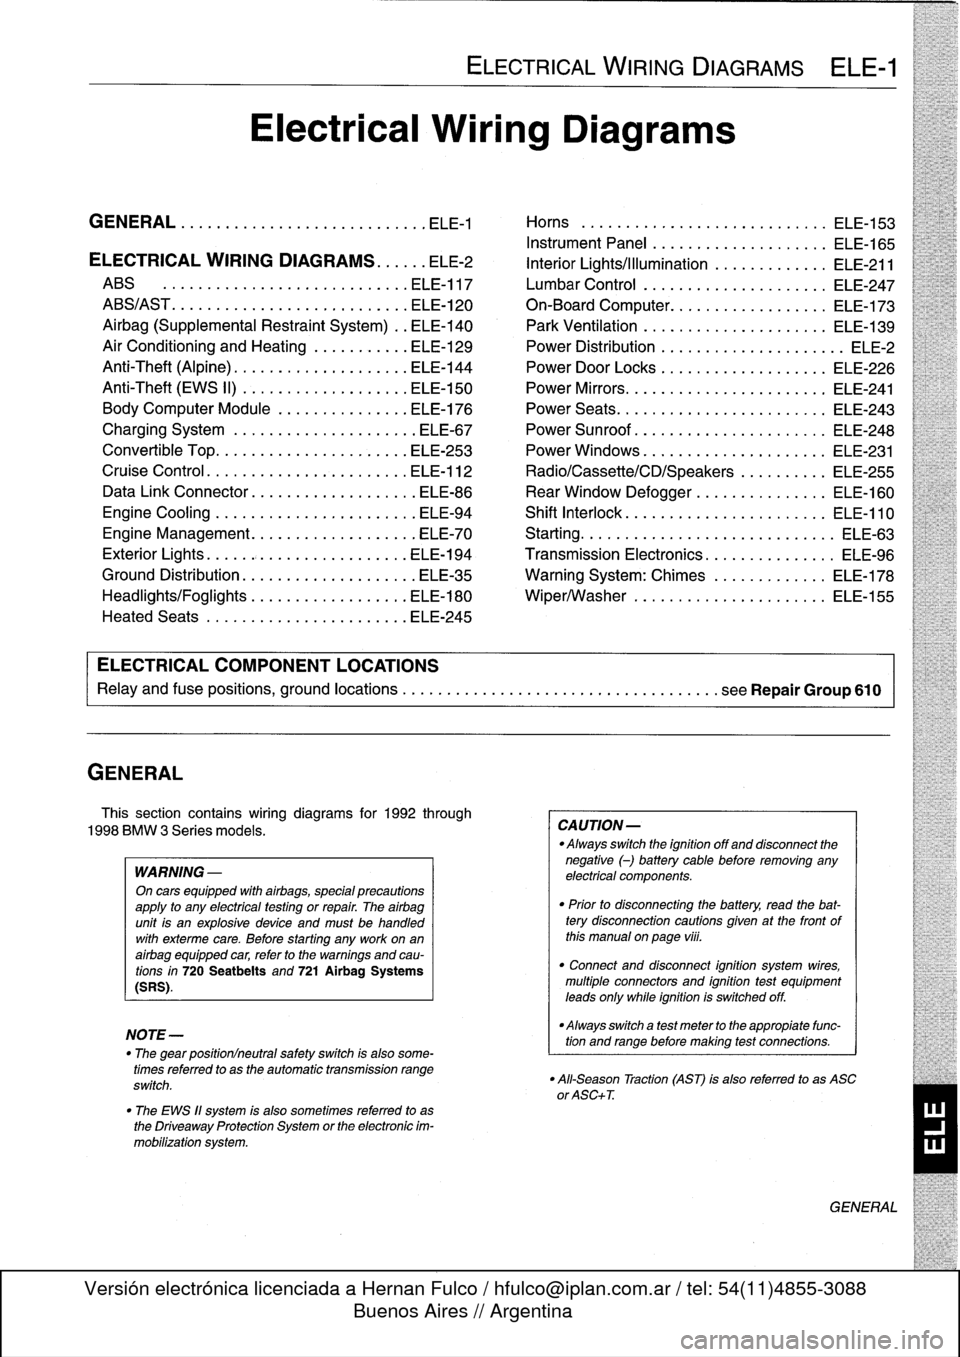 BMW 318i 1997 E36 Repair Manual 
GENERAL

This
section
contains
wiring
diagrams
for
1992
through

1998
BMW
3
Series
models
.

WARNING
-

On
cars
equipped
with
airbags,
special
precautions
apply
to
any
electrical
testing
or
repair
.
